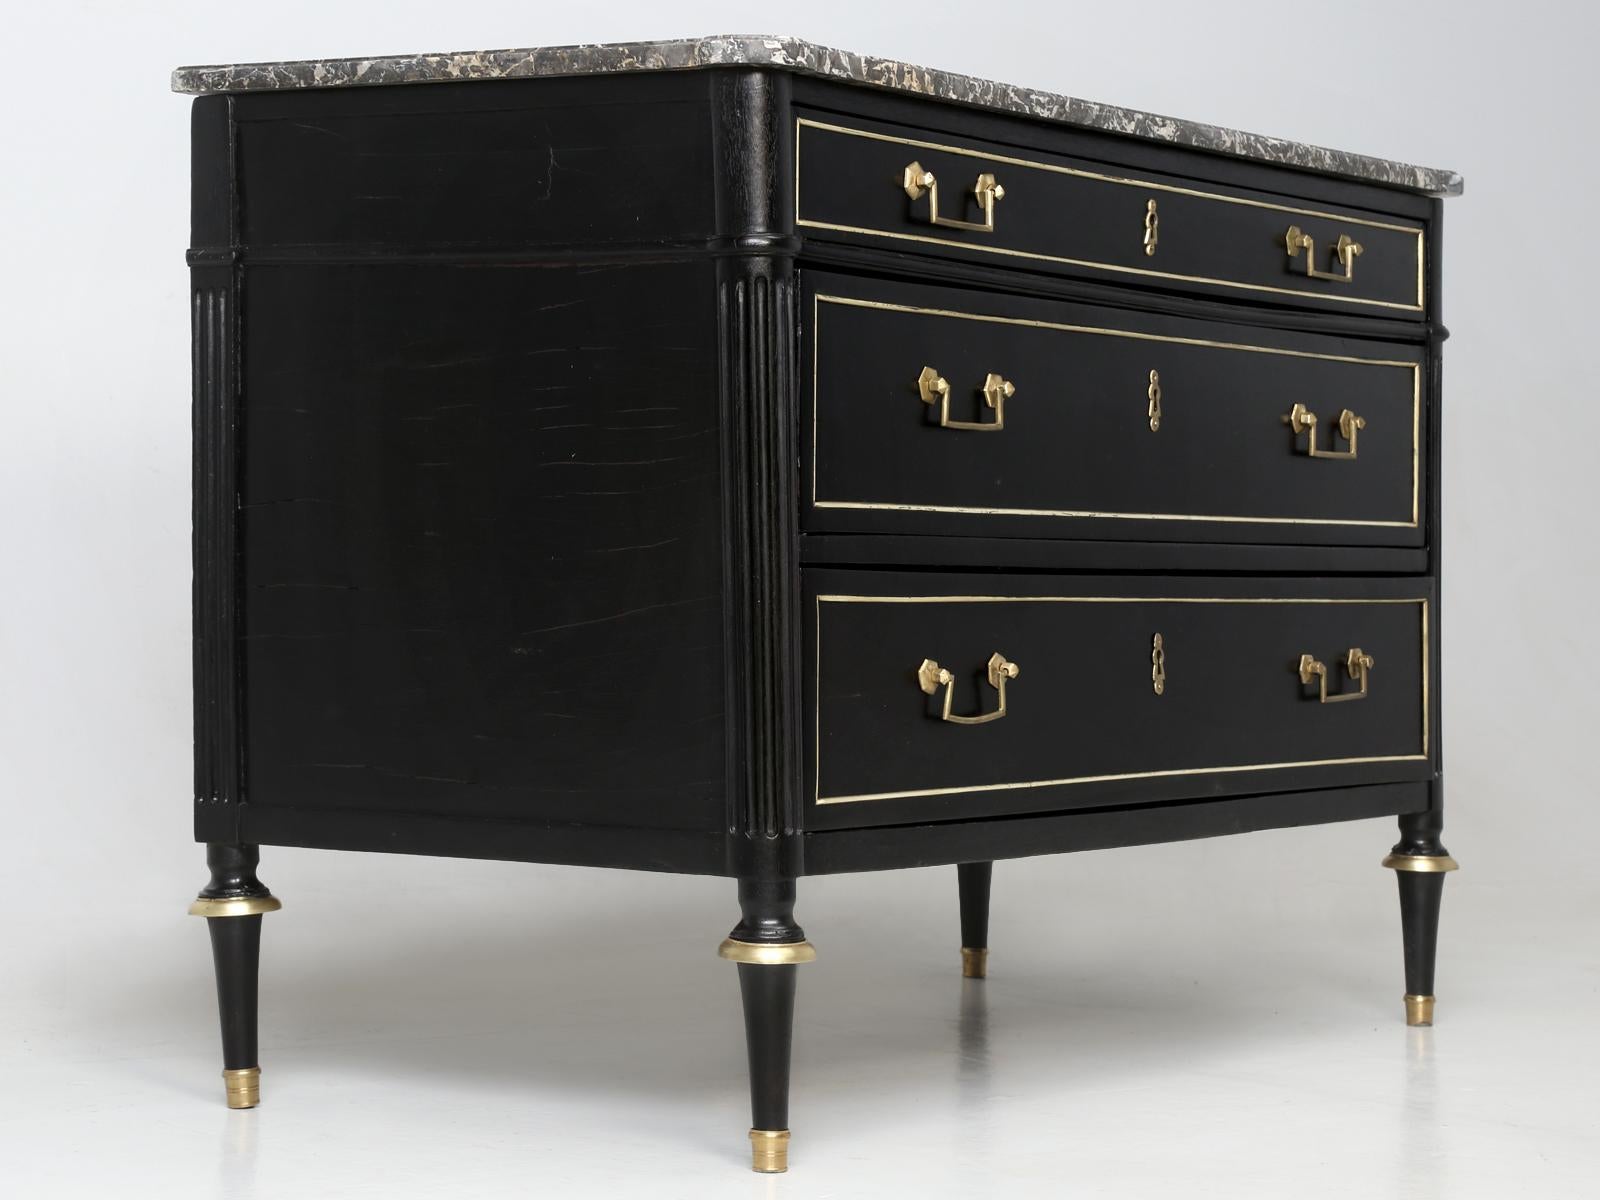 Hand-Crafted Antique French Louis XVI Style Commode in an Ebonized Finish, Restored in House